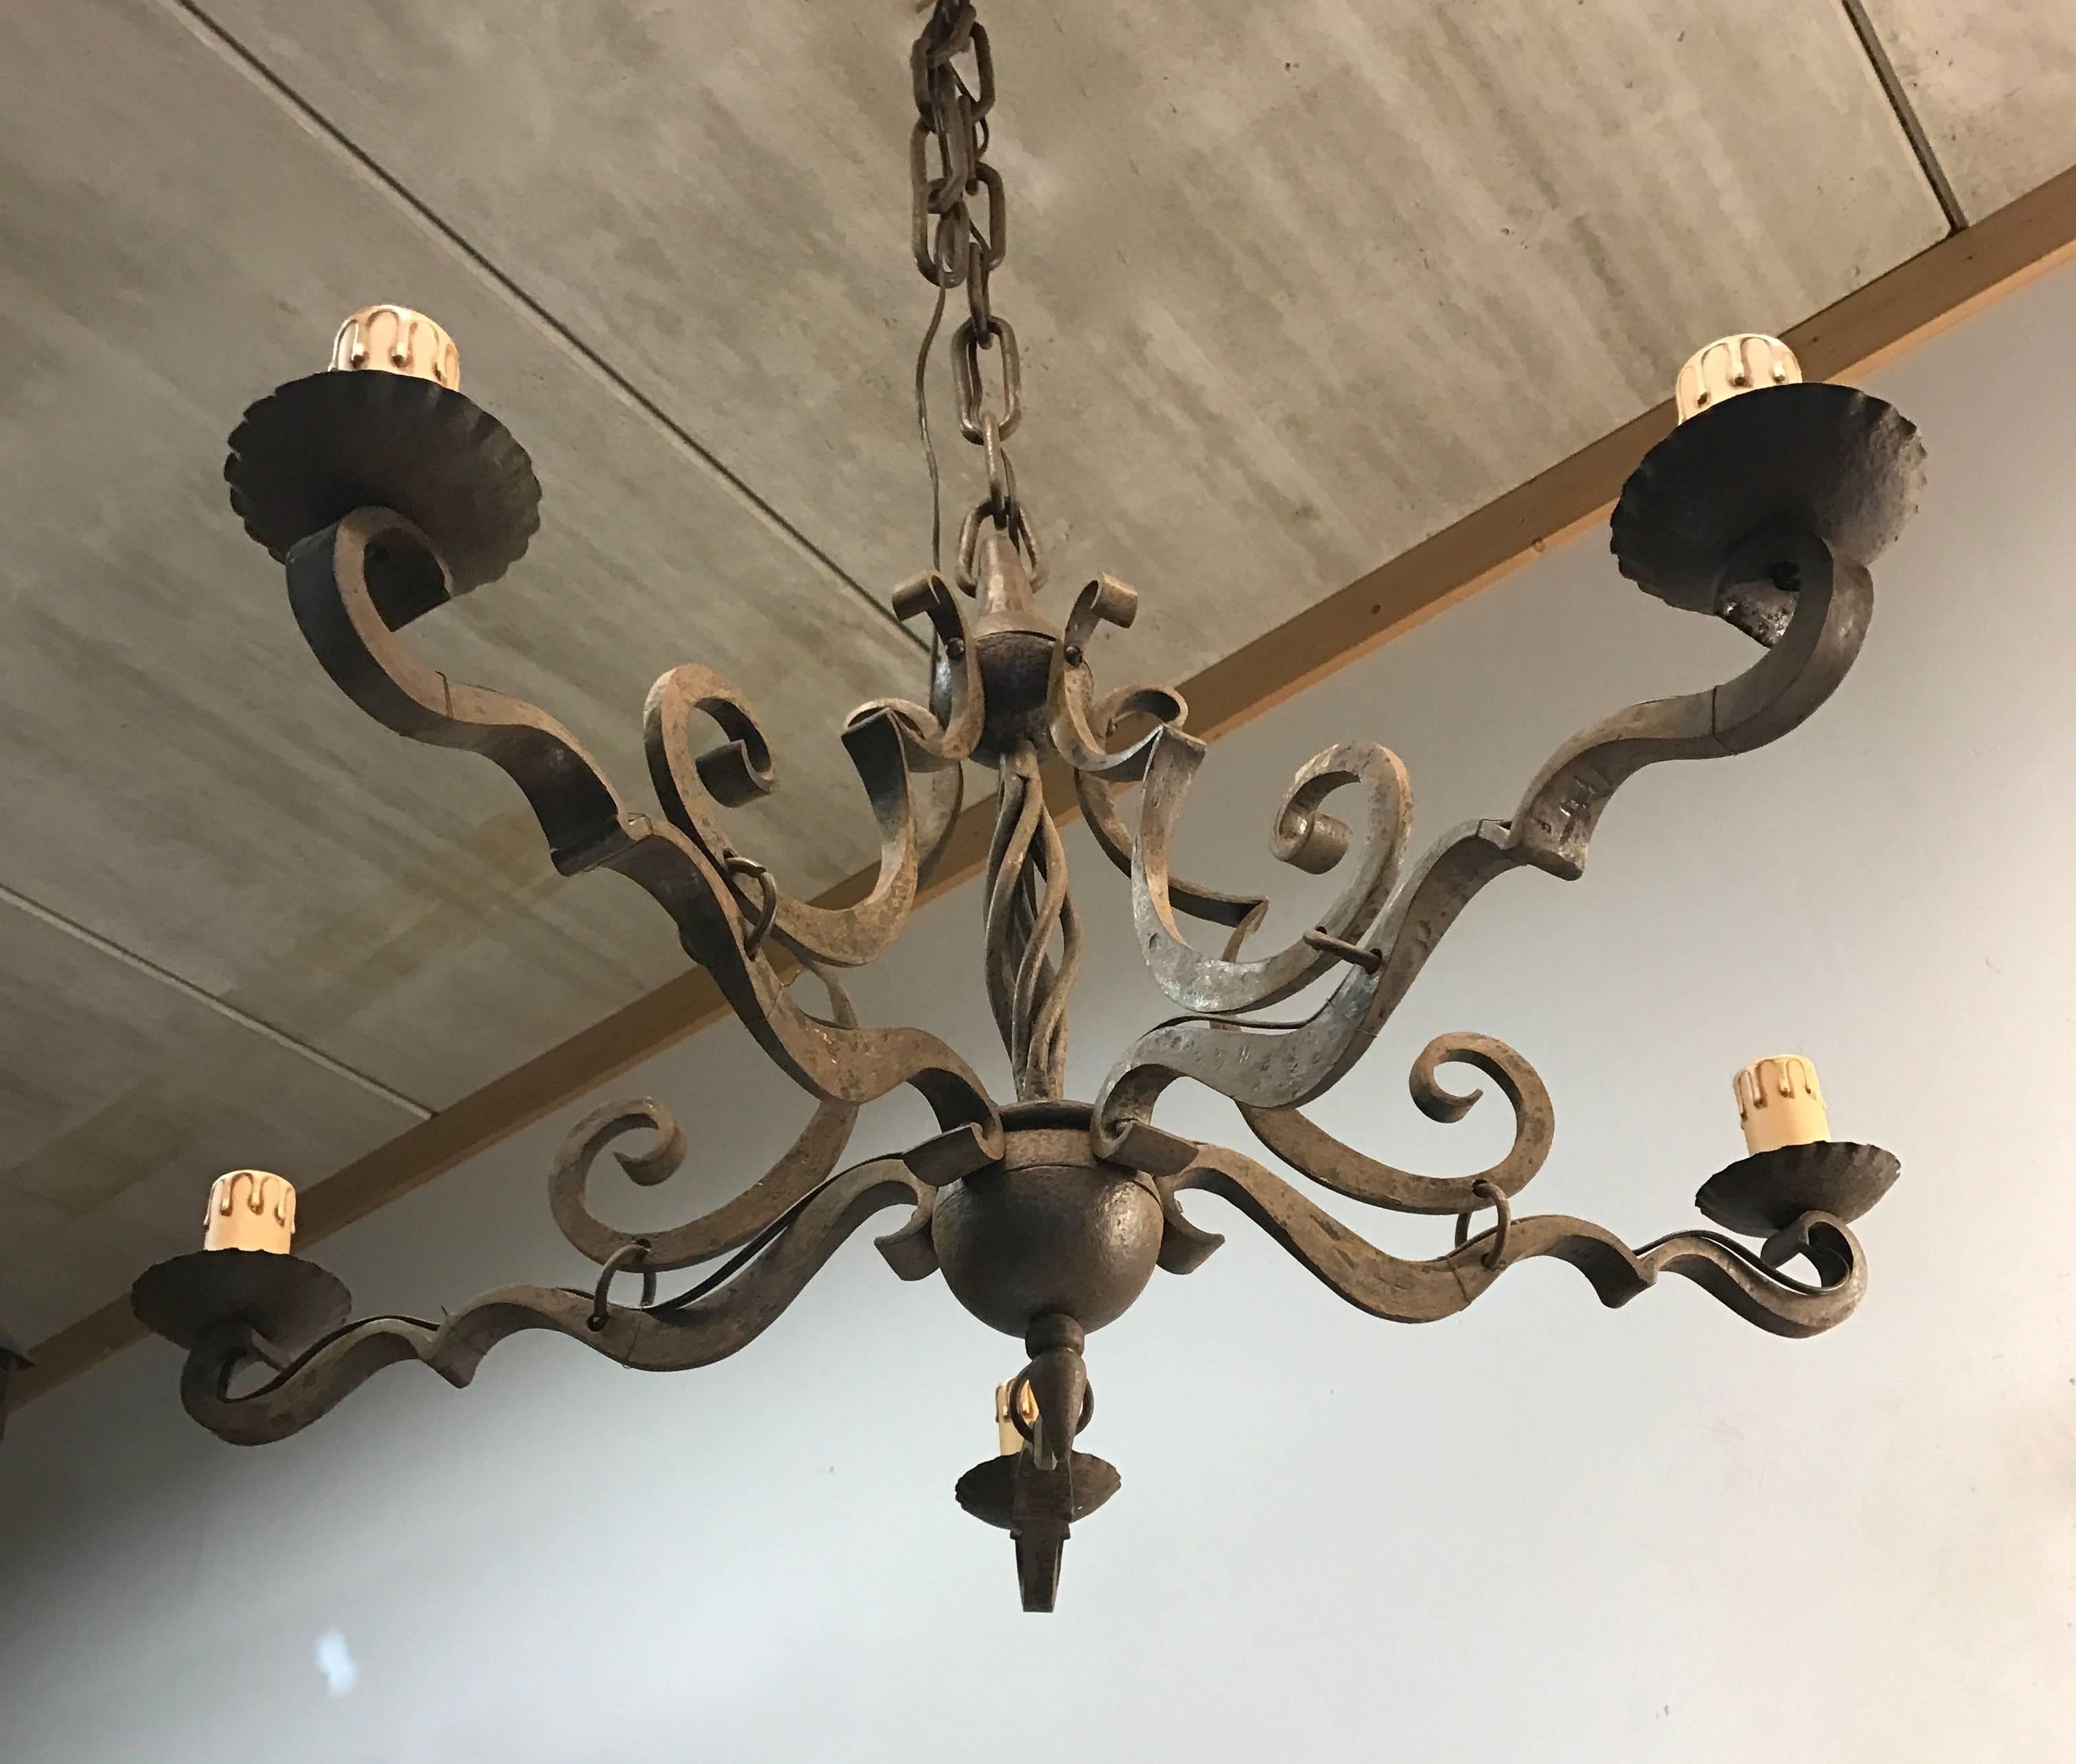 Great quality, handcrafted wrought iron work of lighting art.

Only the best black smiths left in the world today understand the degree of difficulty when it comes to reproducing the thick arms of this chandelier in exactly the same shape and